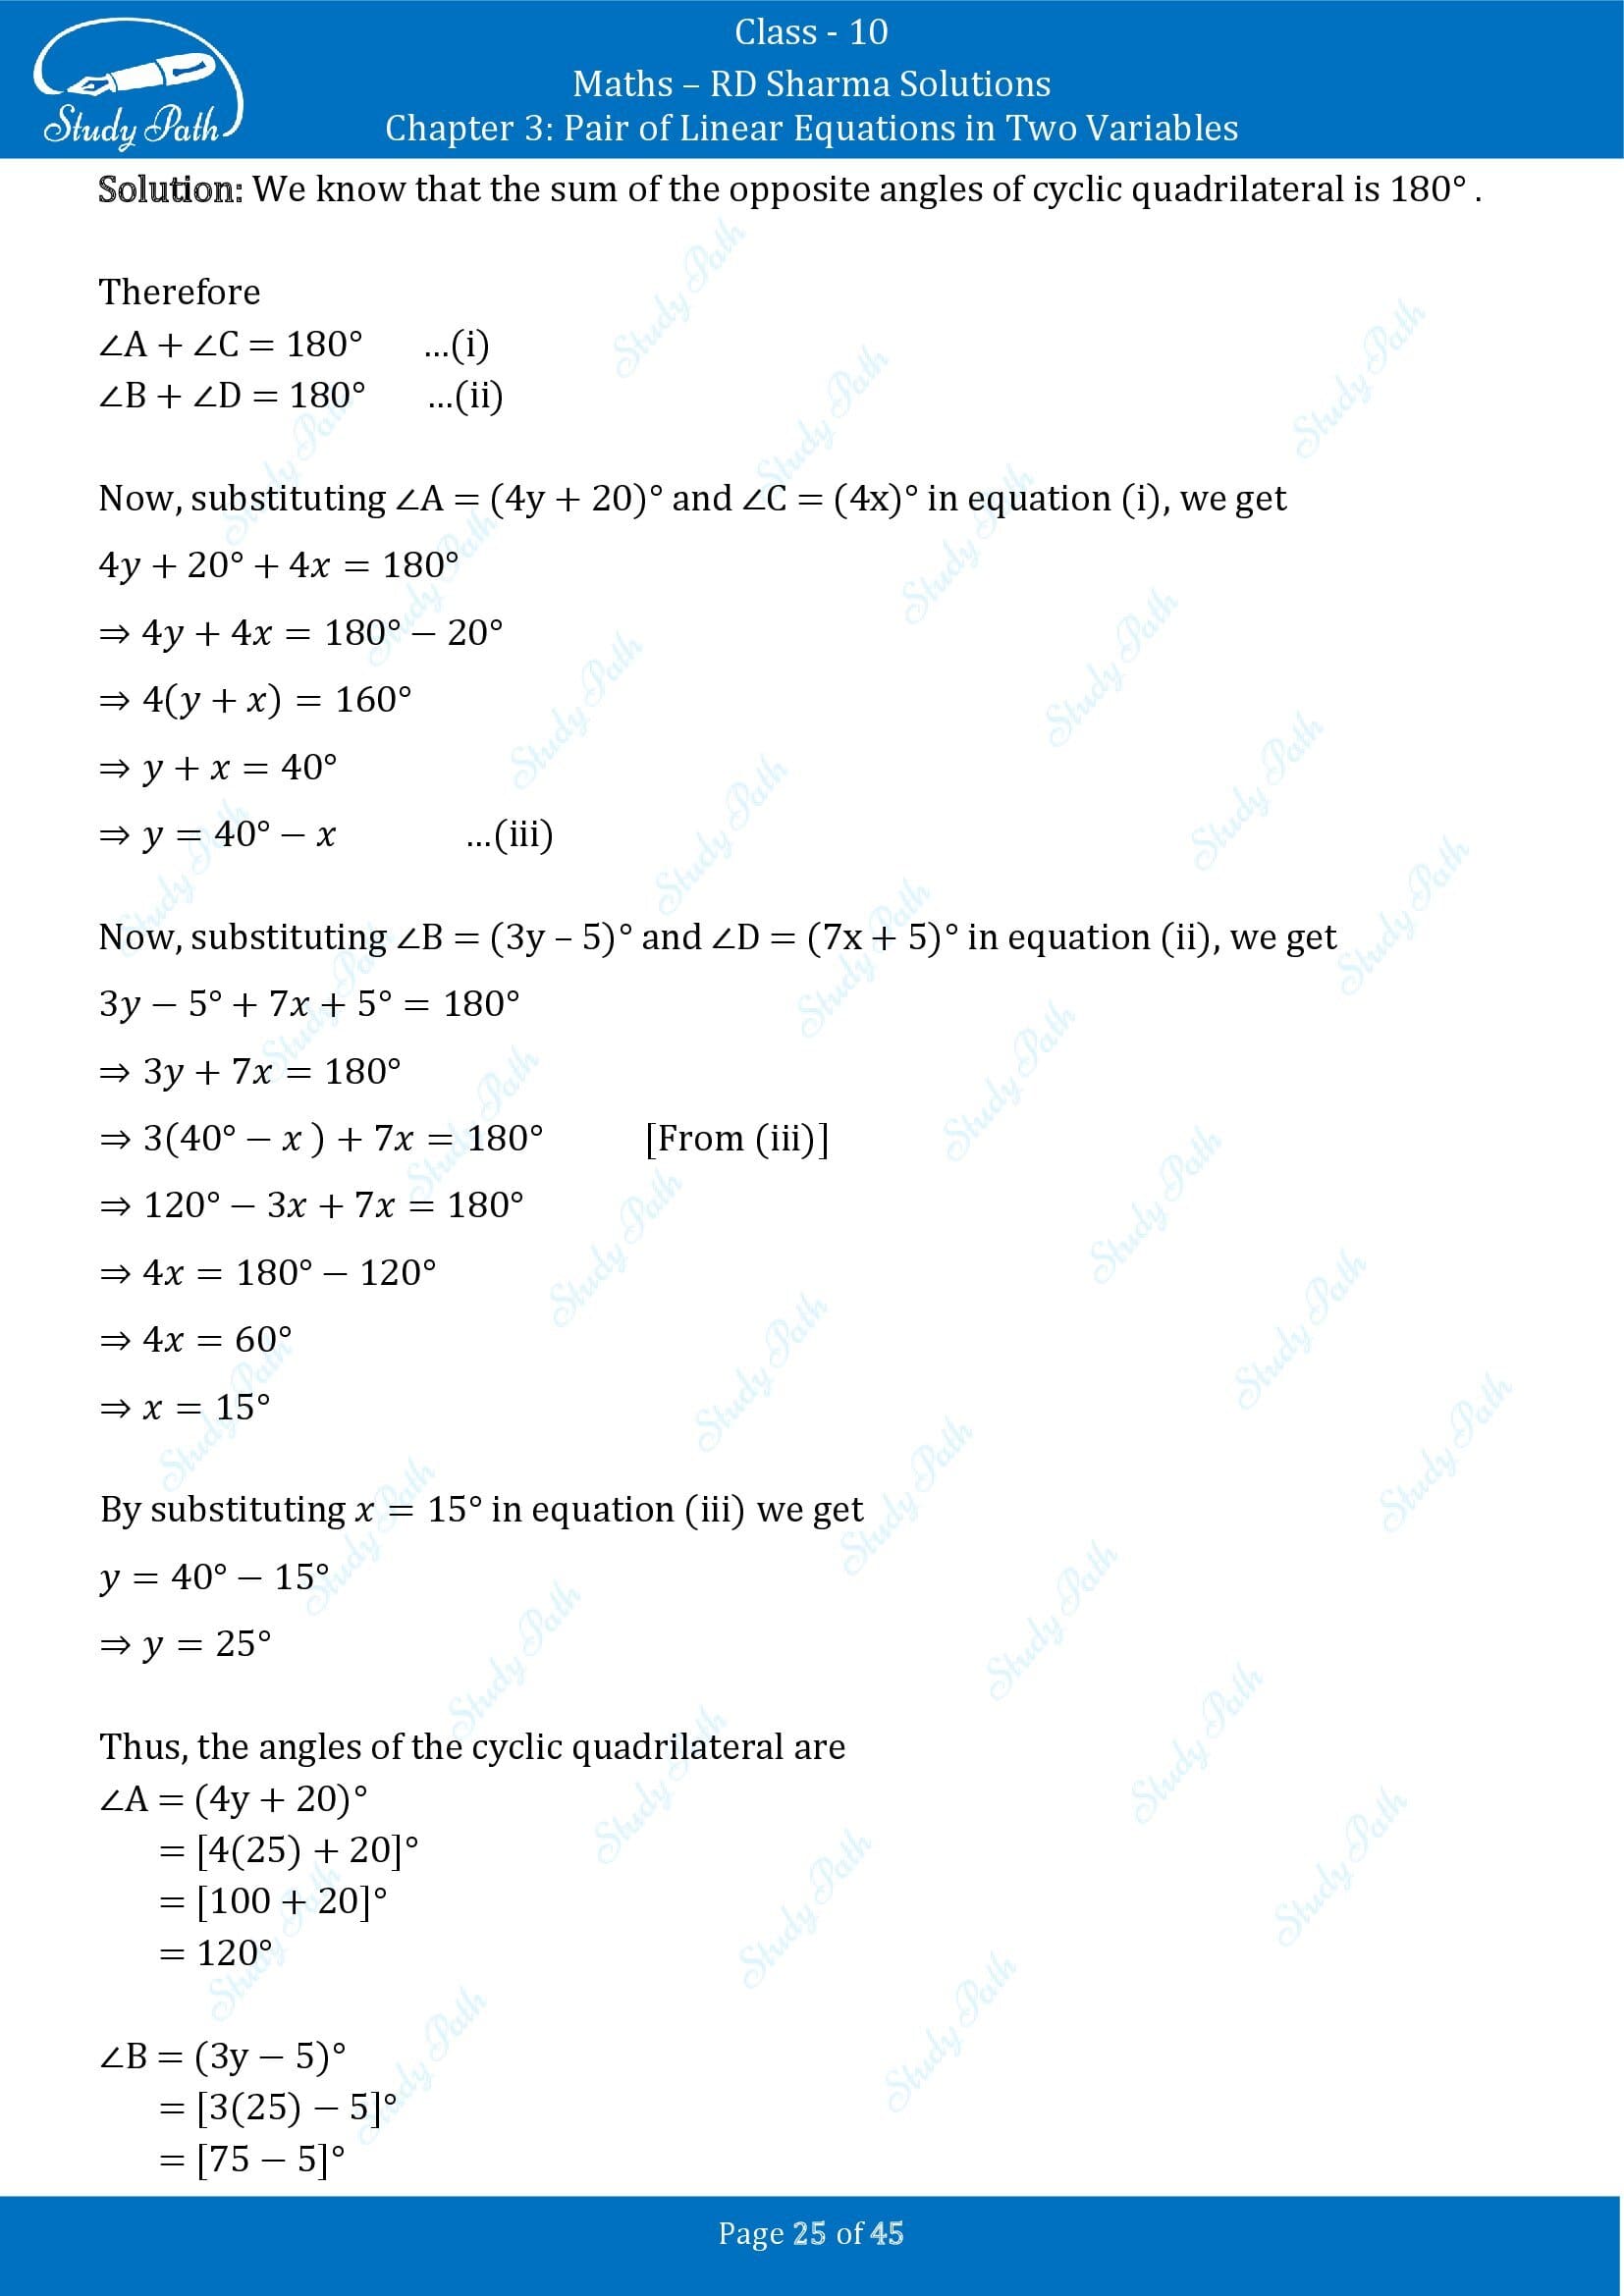 RD Sharma Solutions Class 10 Chapter 3 Pair of Linear Equations in Two Variables Exercise 3.11 00025